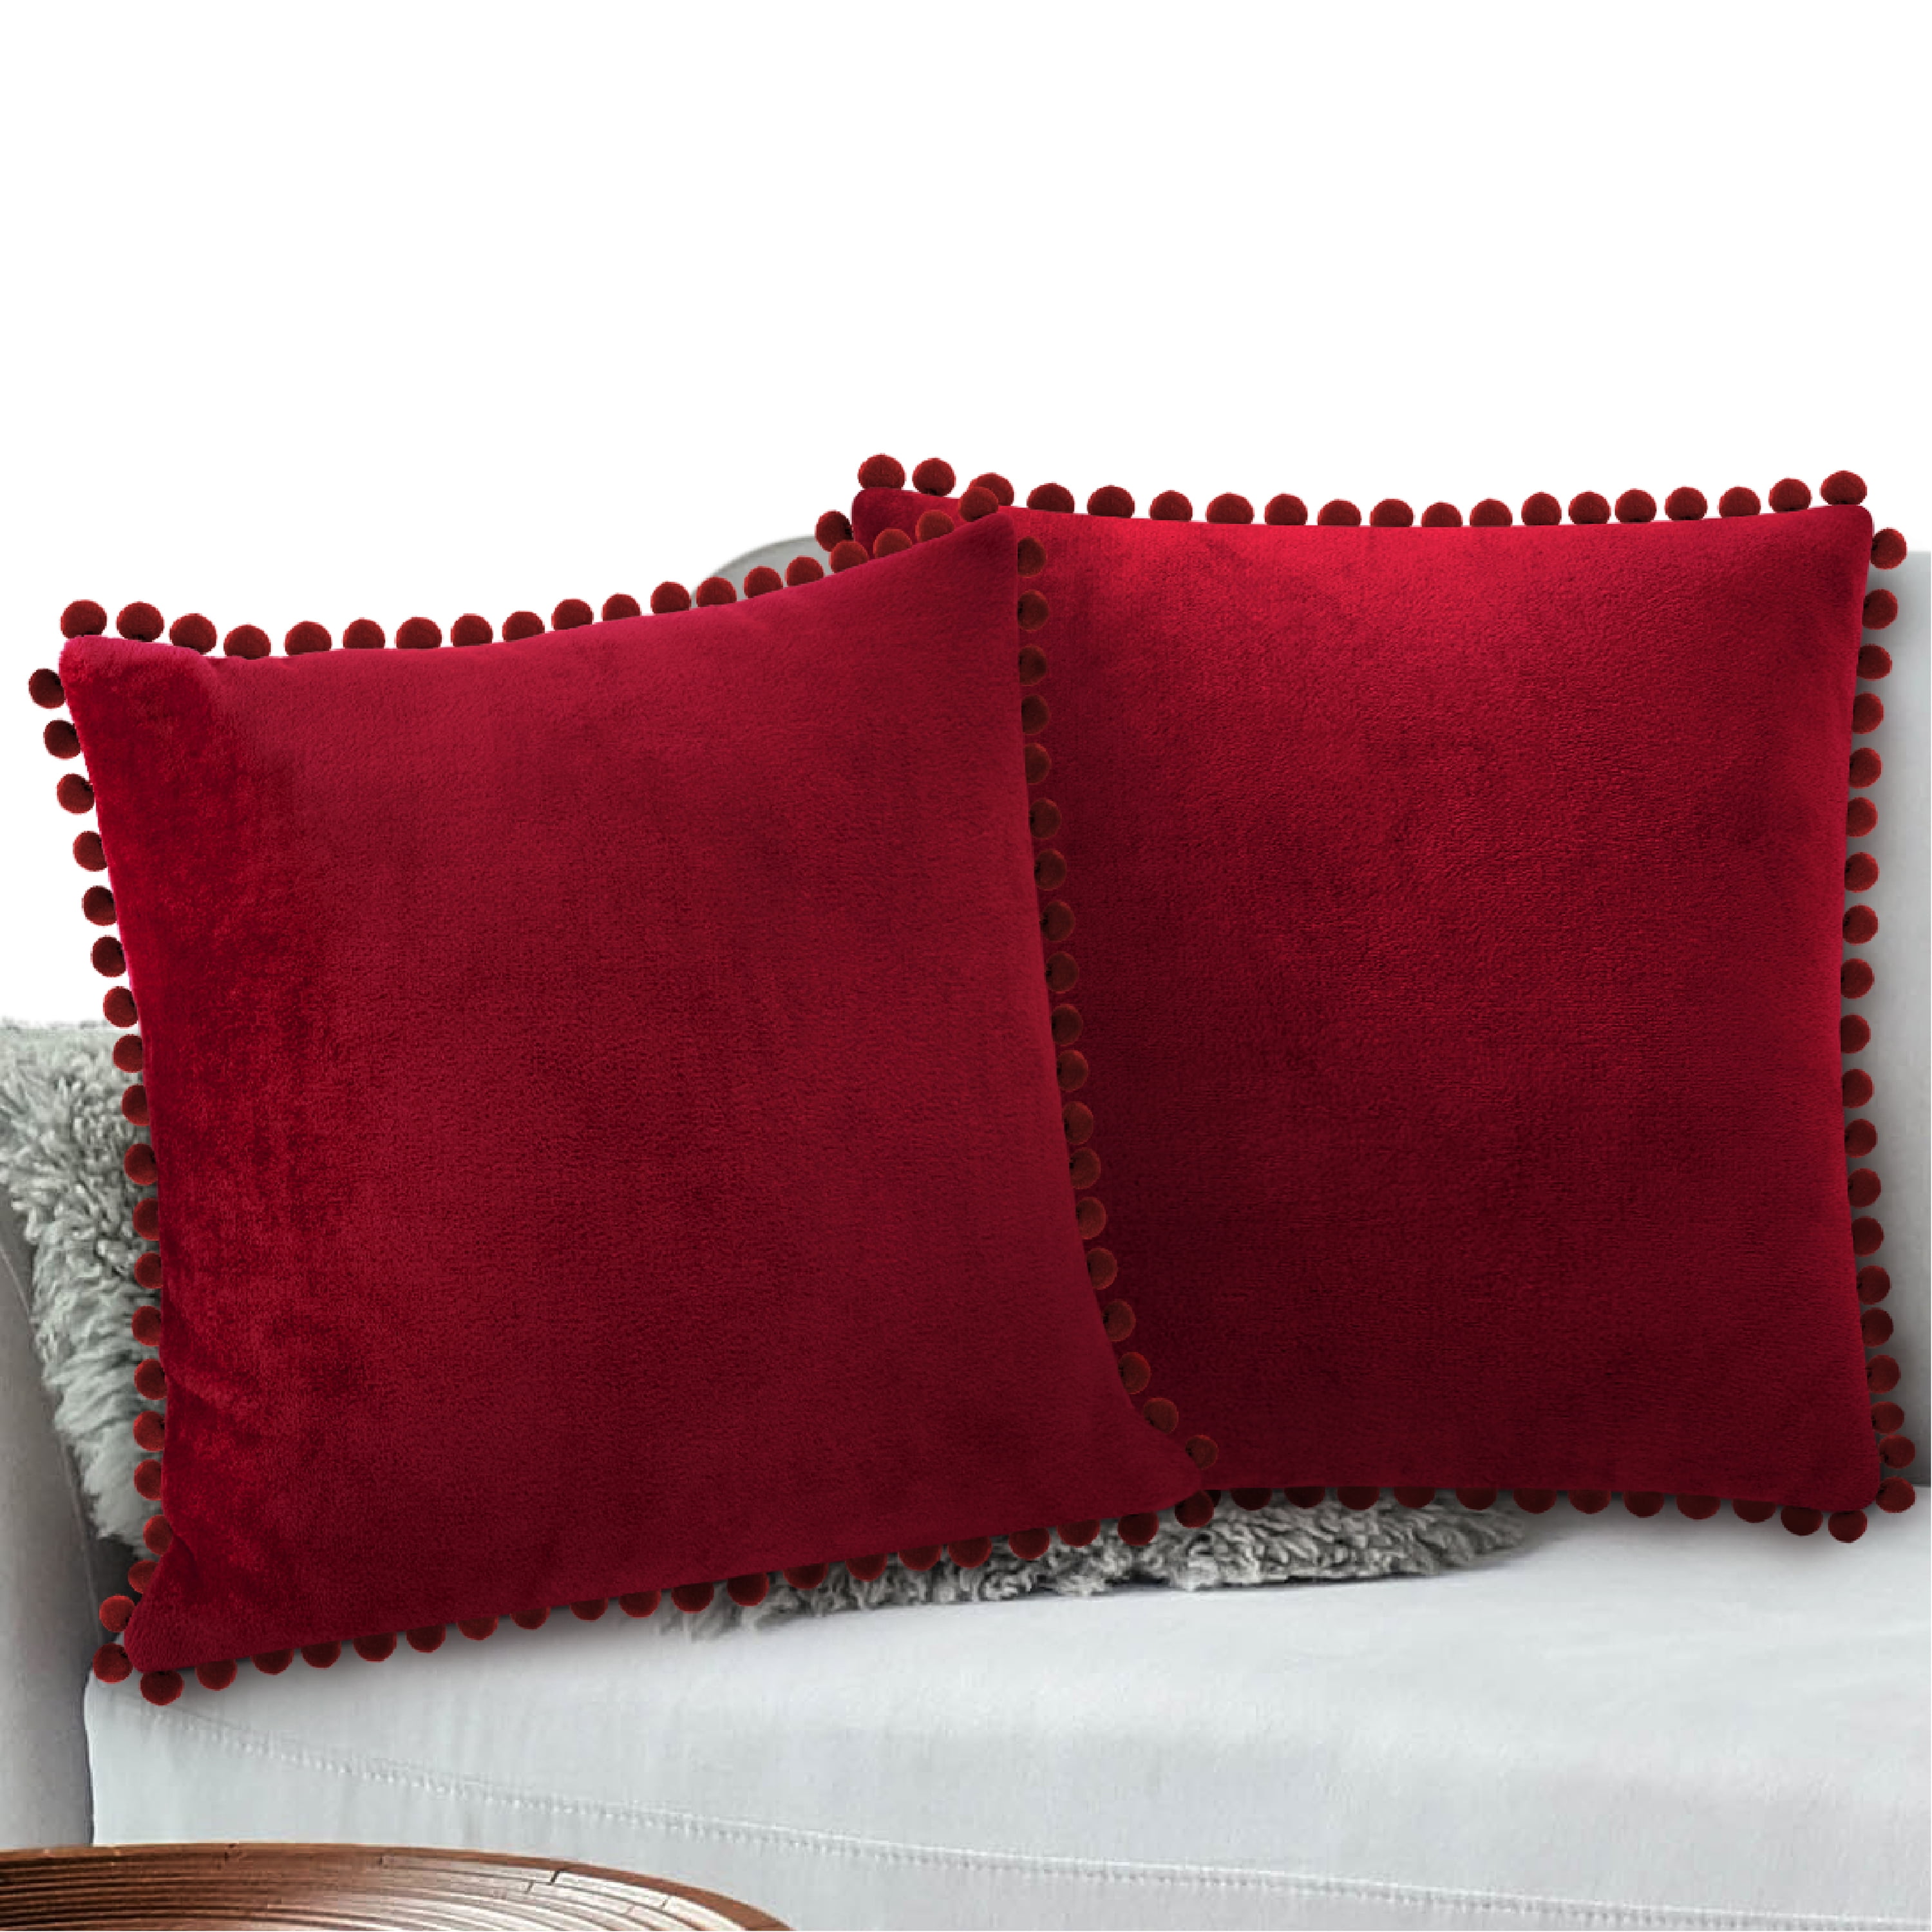 Pillow Covers 18x18 Couch Pillows with Zipper Washable Polyester Fluffy & Soft Decorative Pillow Covers PAULEON Throw Pillow Covers Set of 2 White and Wine Red Pillow Covers 